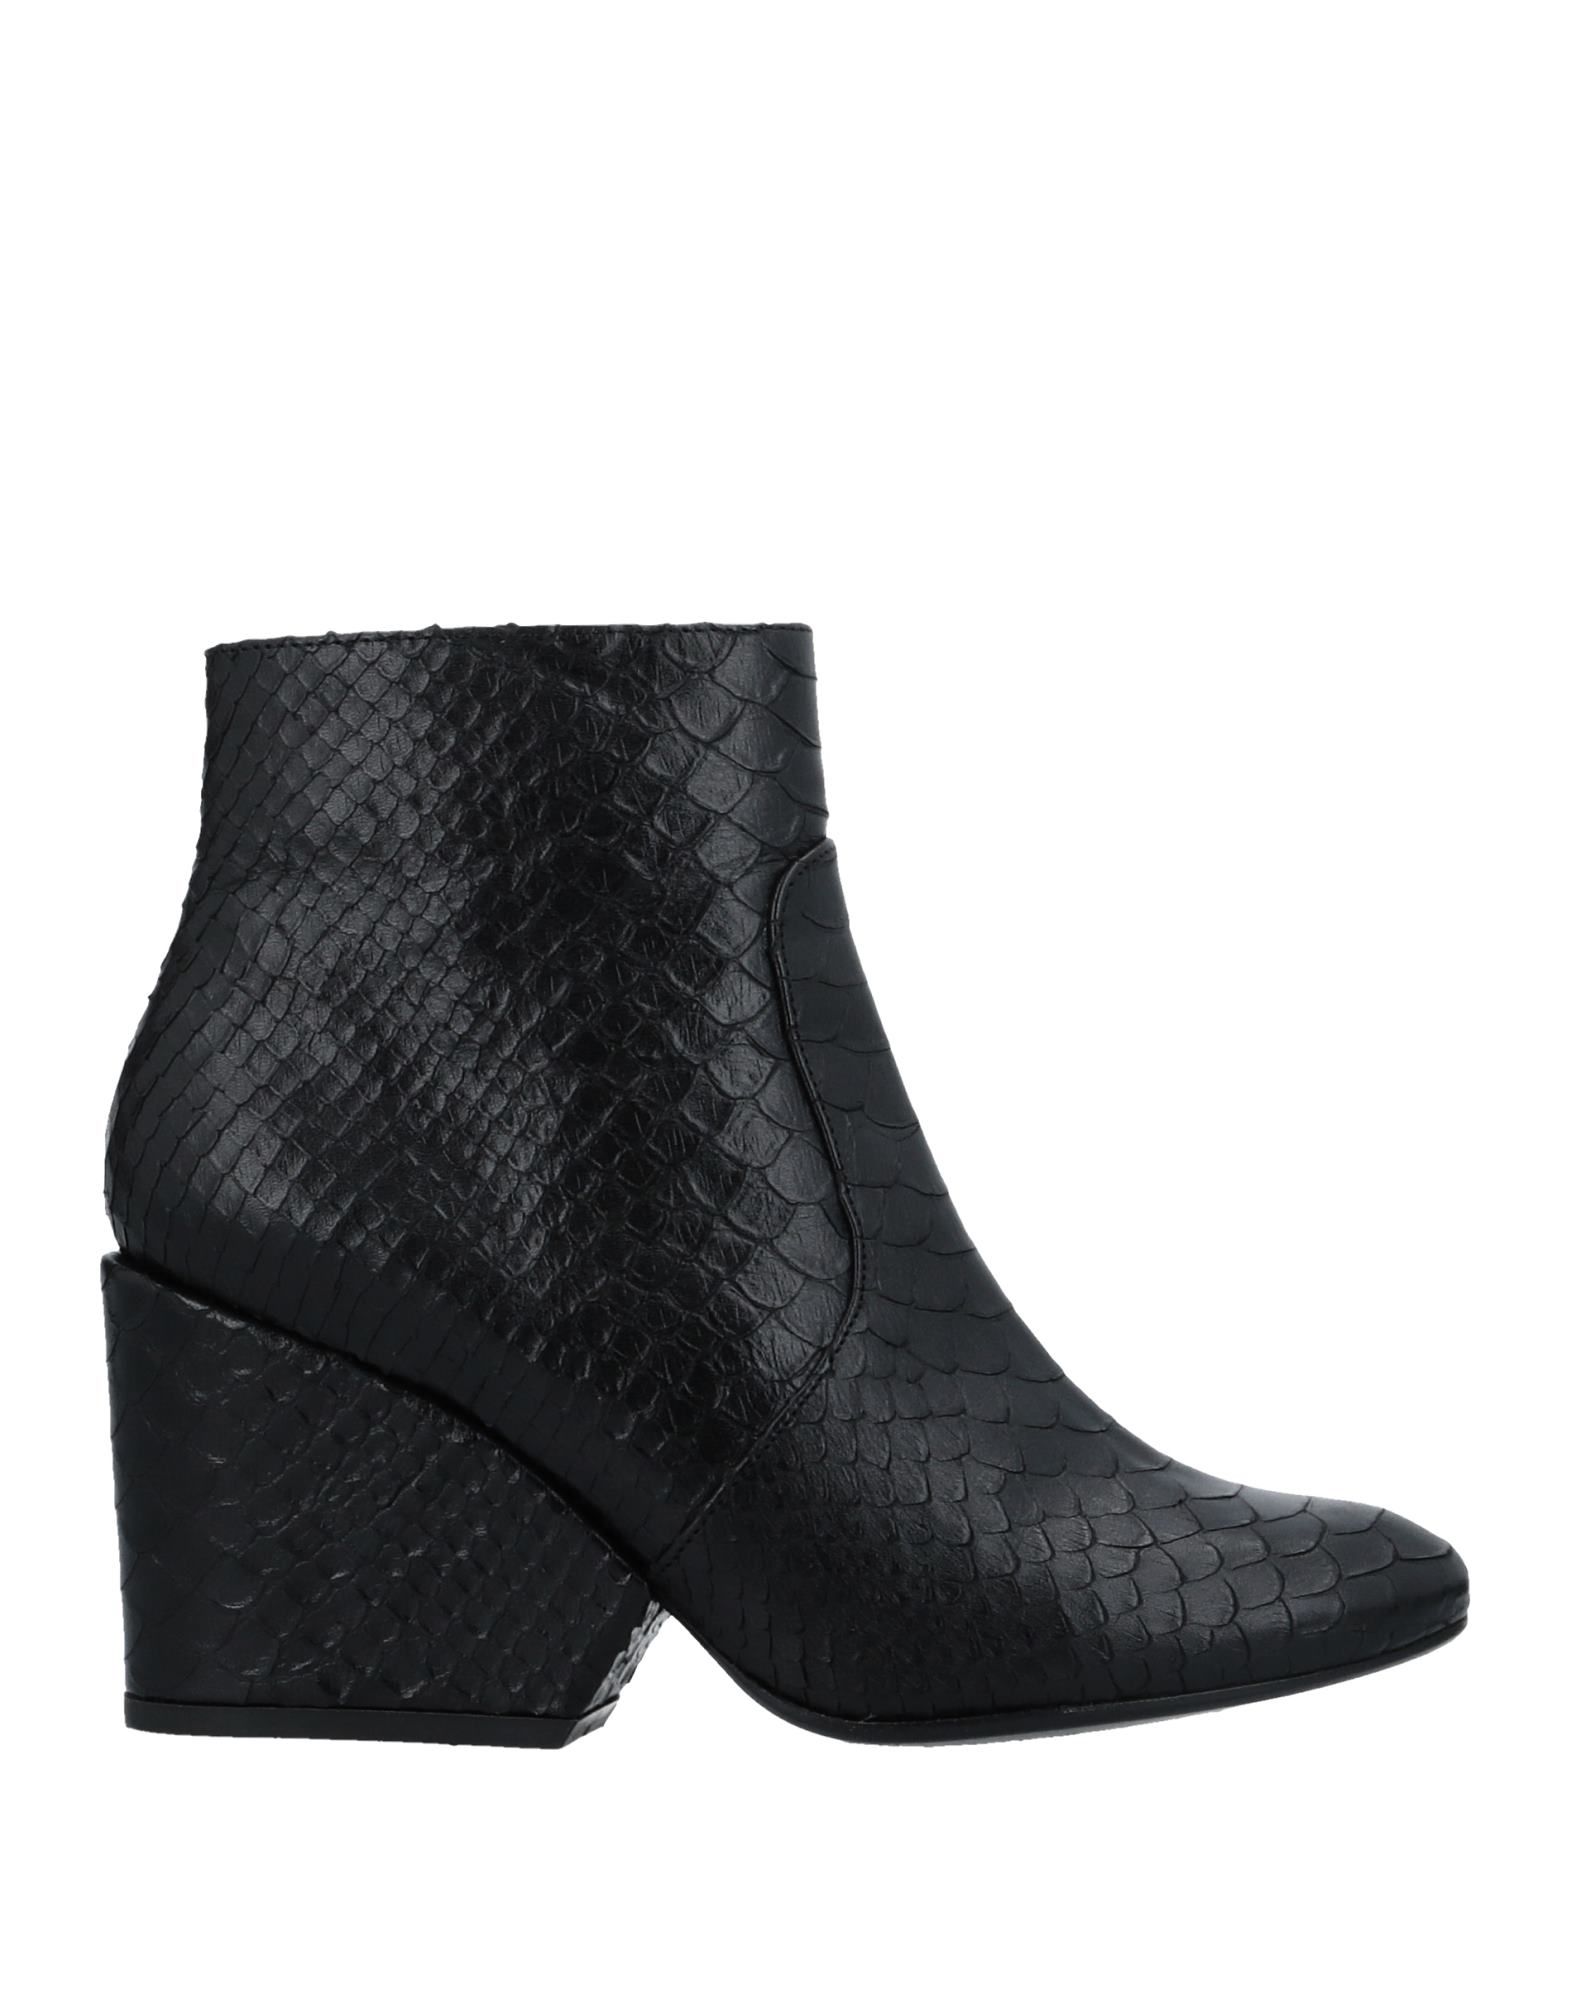 ROBERT CLERGERIE Ankle boot,11508262PB 5